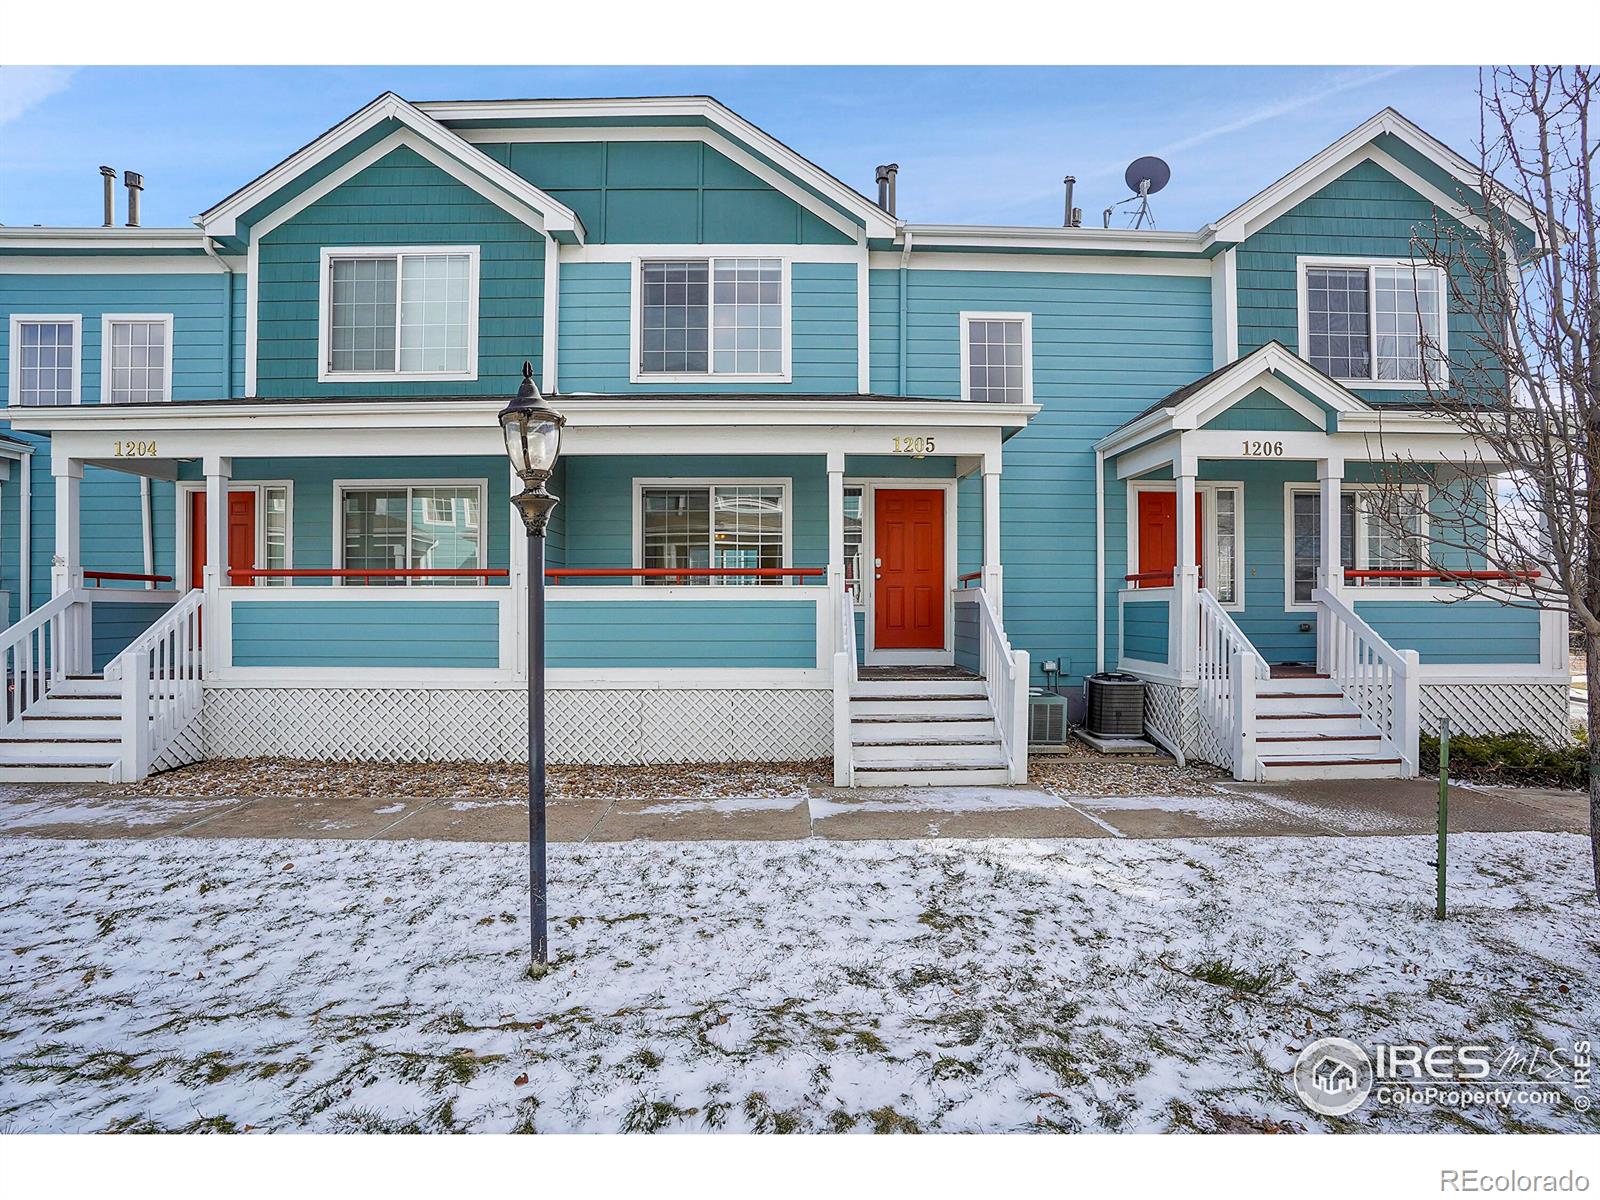 Report Image for 3660 W 25th Street,Greeley, Colorado